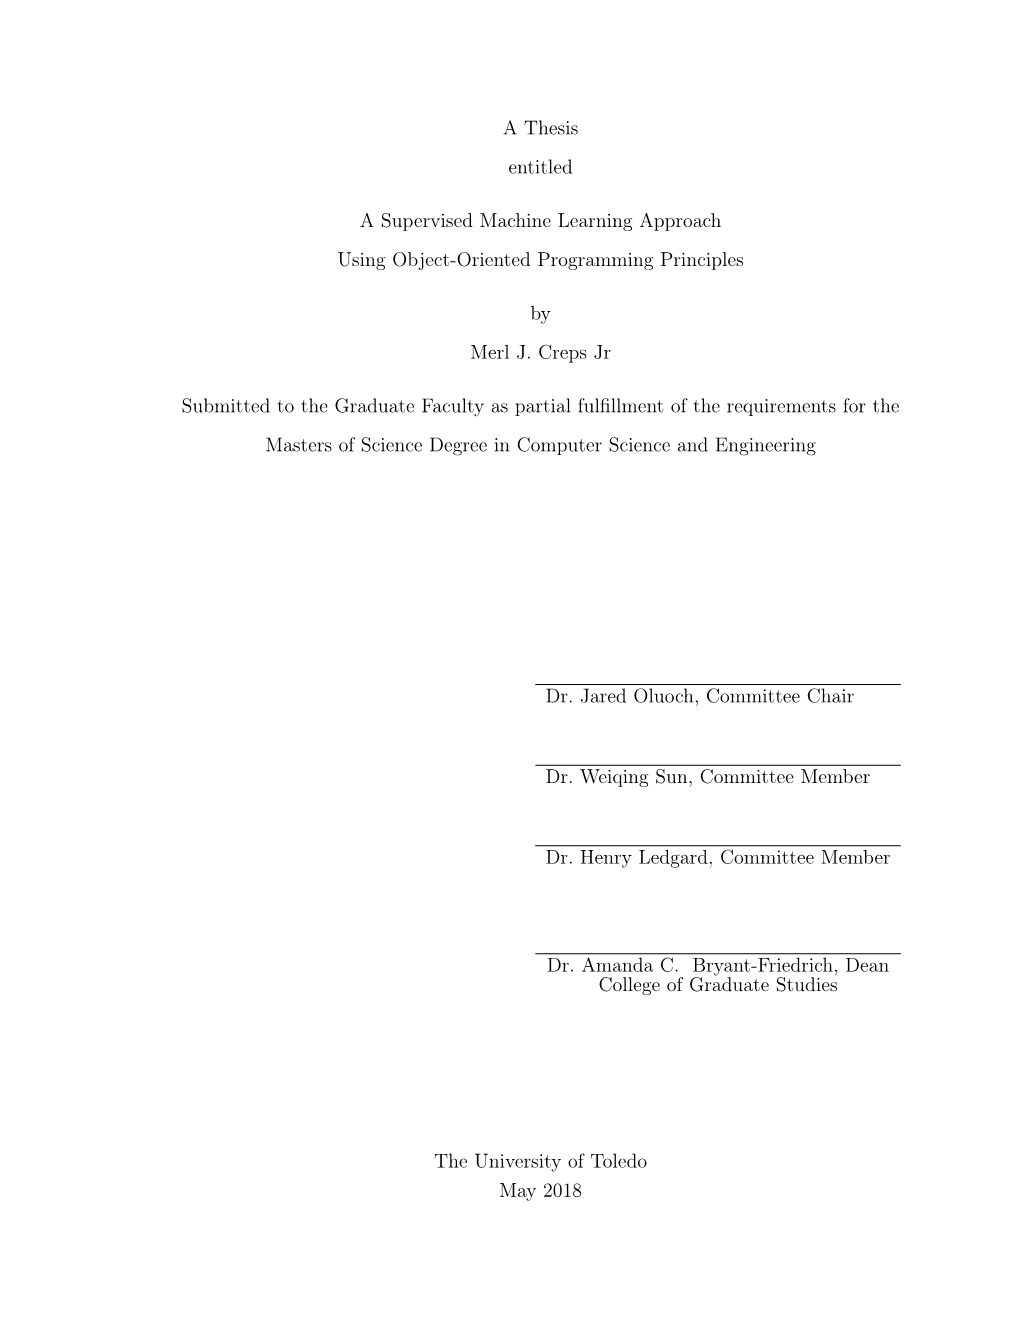 A Thesis Entitled a Supervised Machine Learning Approach Using